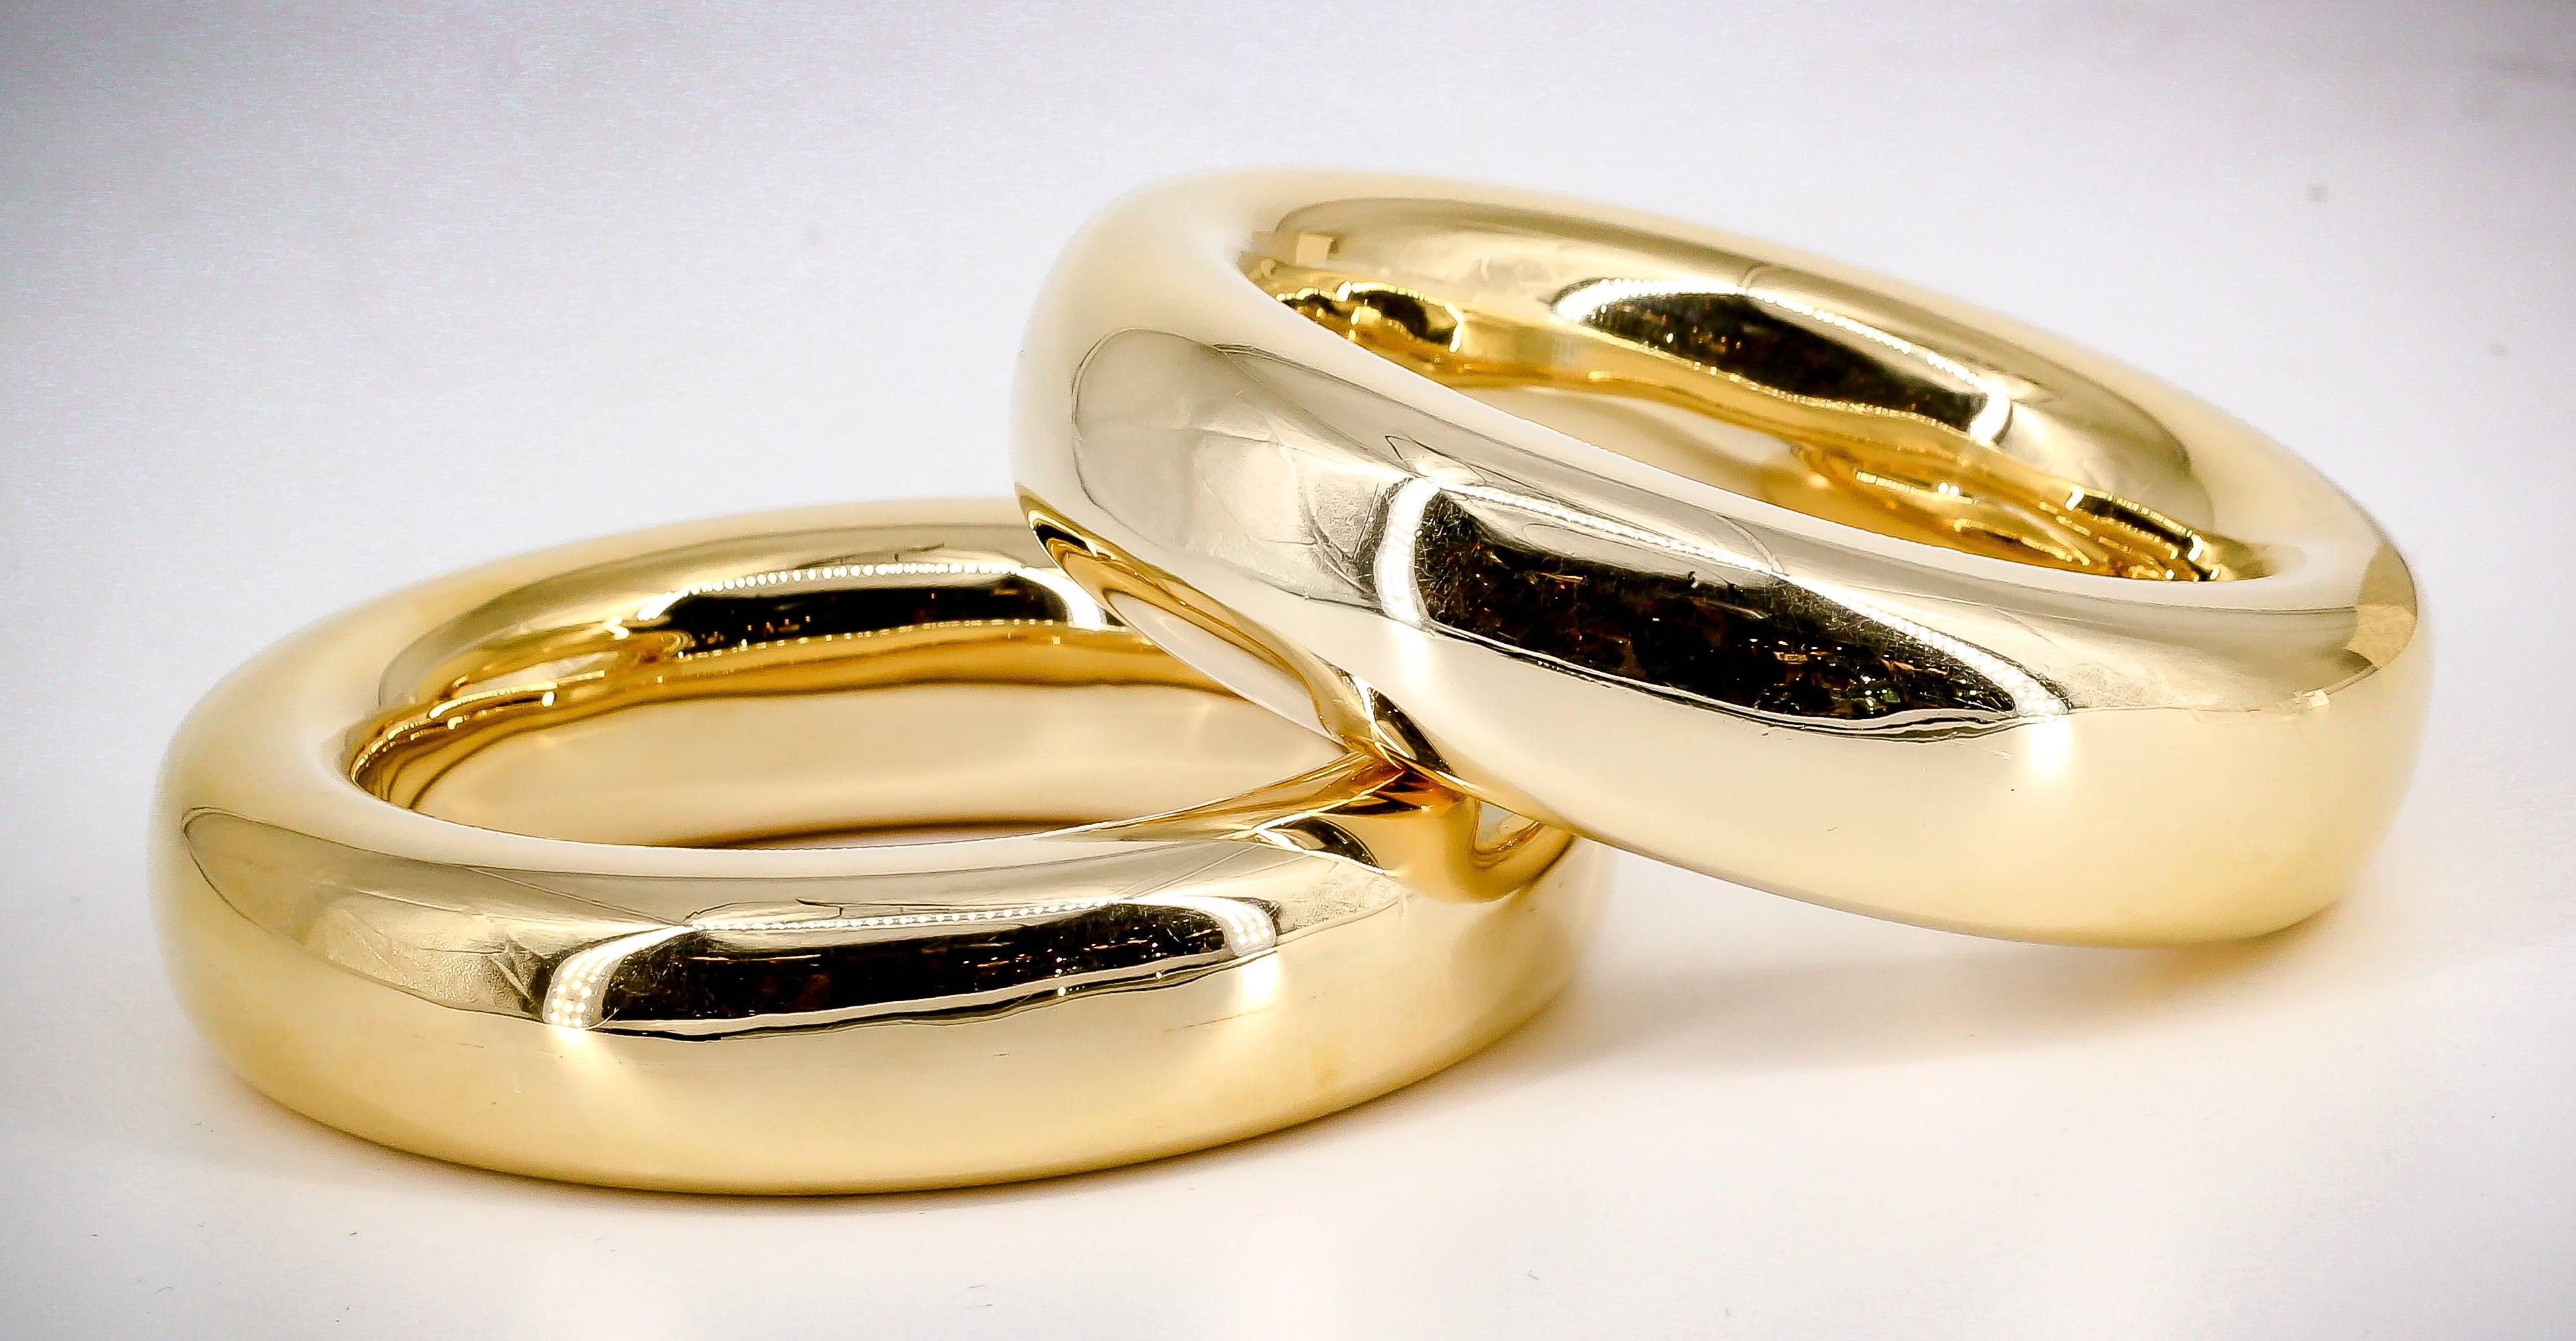 Bold pair of 18K gold bangle bracelets by Tiffany & Co. Elsa Peretti. One is marked 1981, while the other one is a recent make. Current retail price is $18000 for each, $36000 combined.

Hallmarks: 
1) Tiffany & Co. Elsa Peretti, 750 Italy
2)